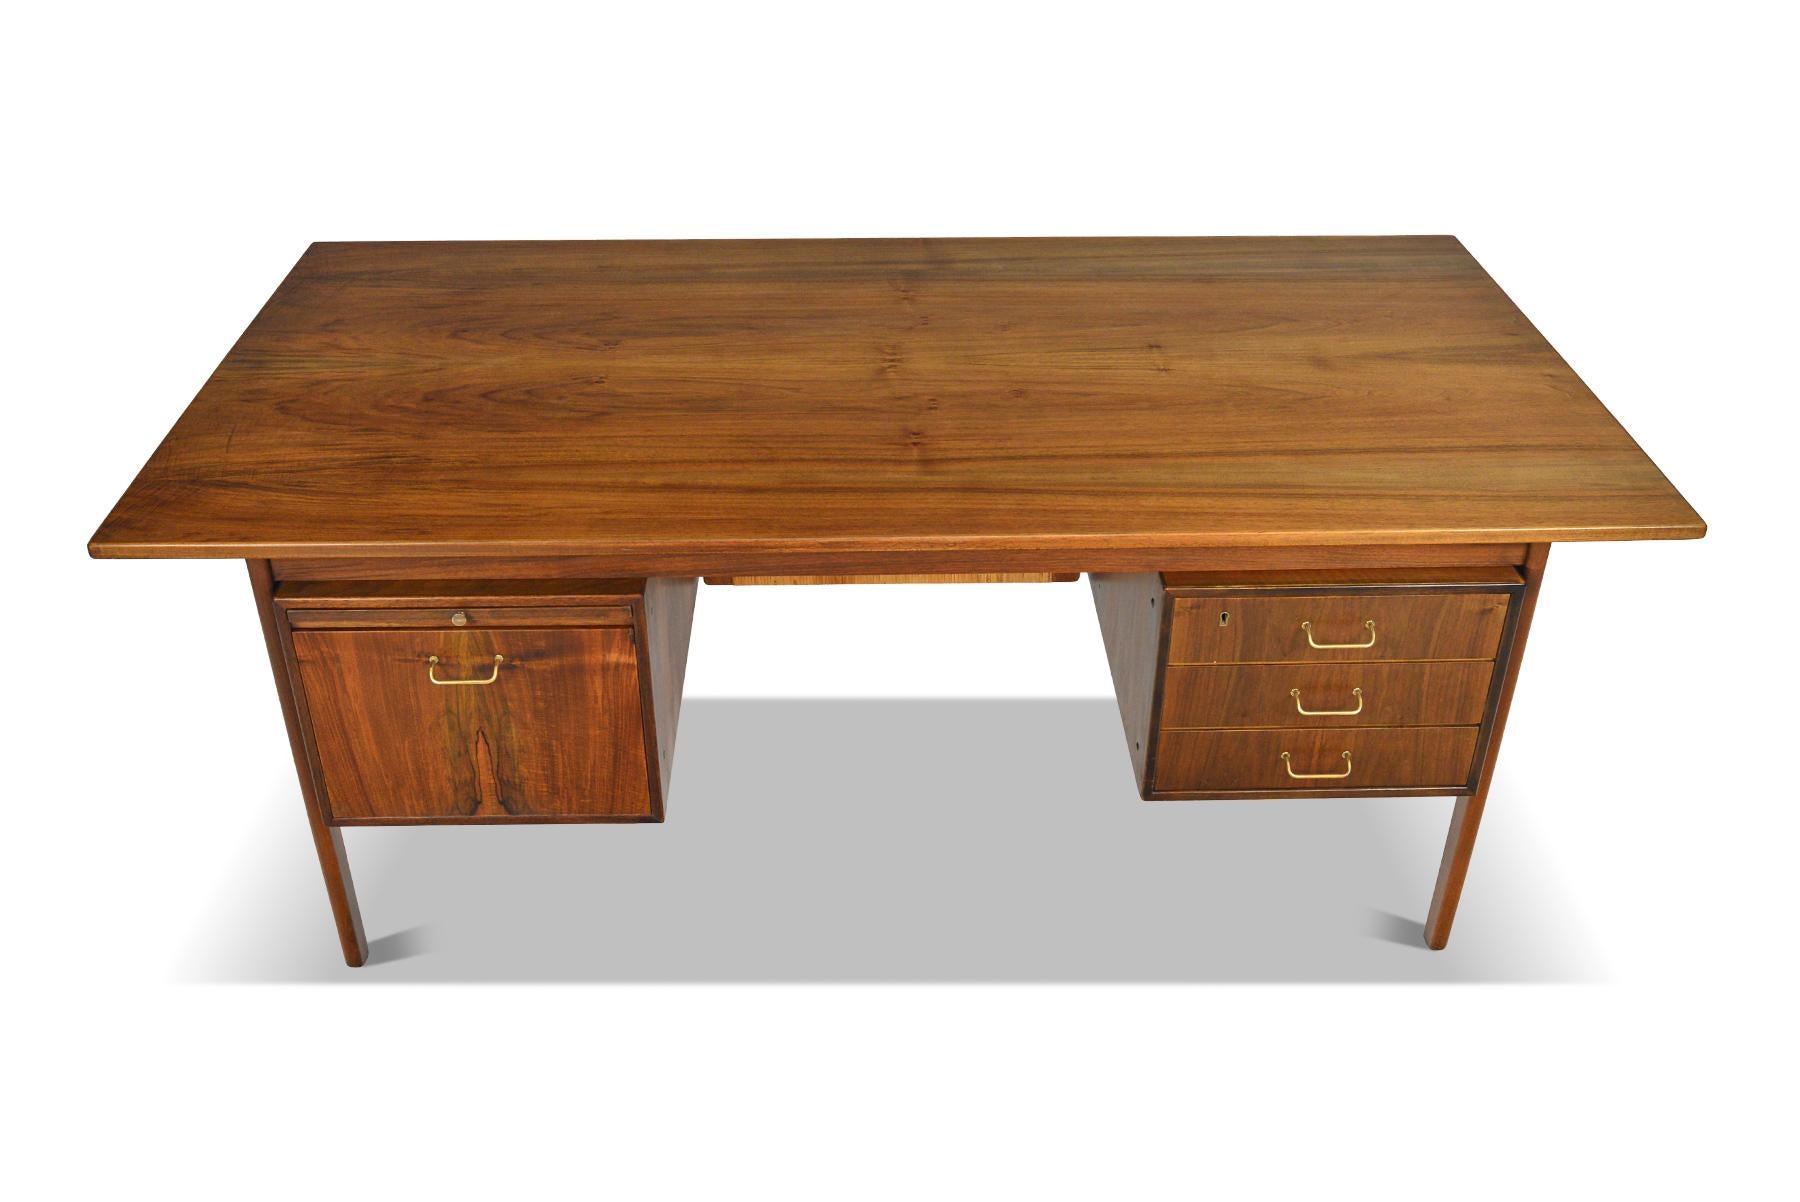 This remarkably well- preserved Danish modern executive desk was designed by Torben Strandgaard in the 1960s. This large walnut desk features a pull out writing tray, bank of drawers, and deep cabinet drawer. Adorned with original hand woven privacy